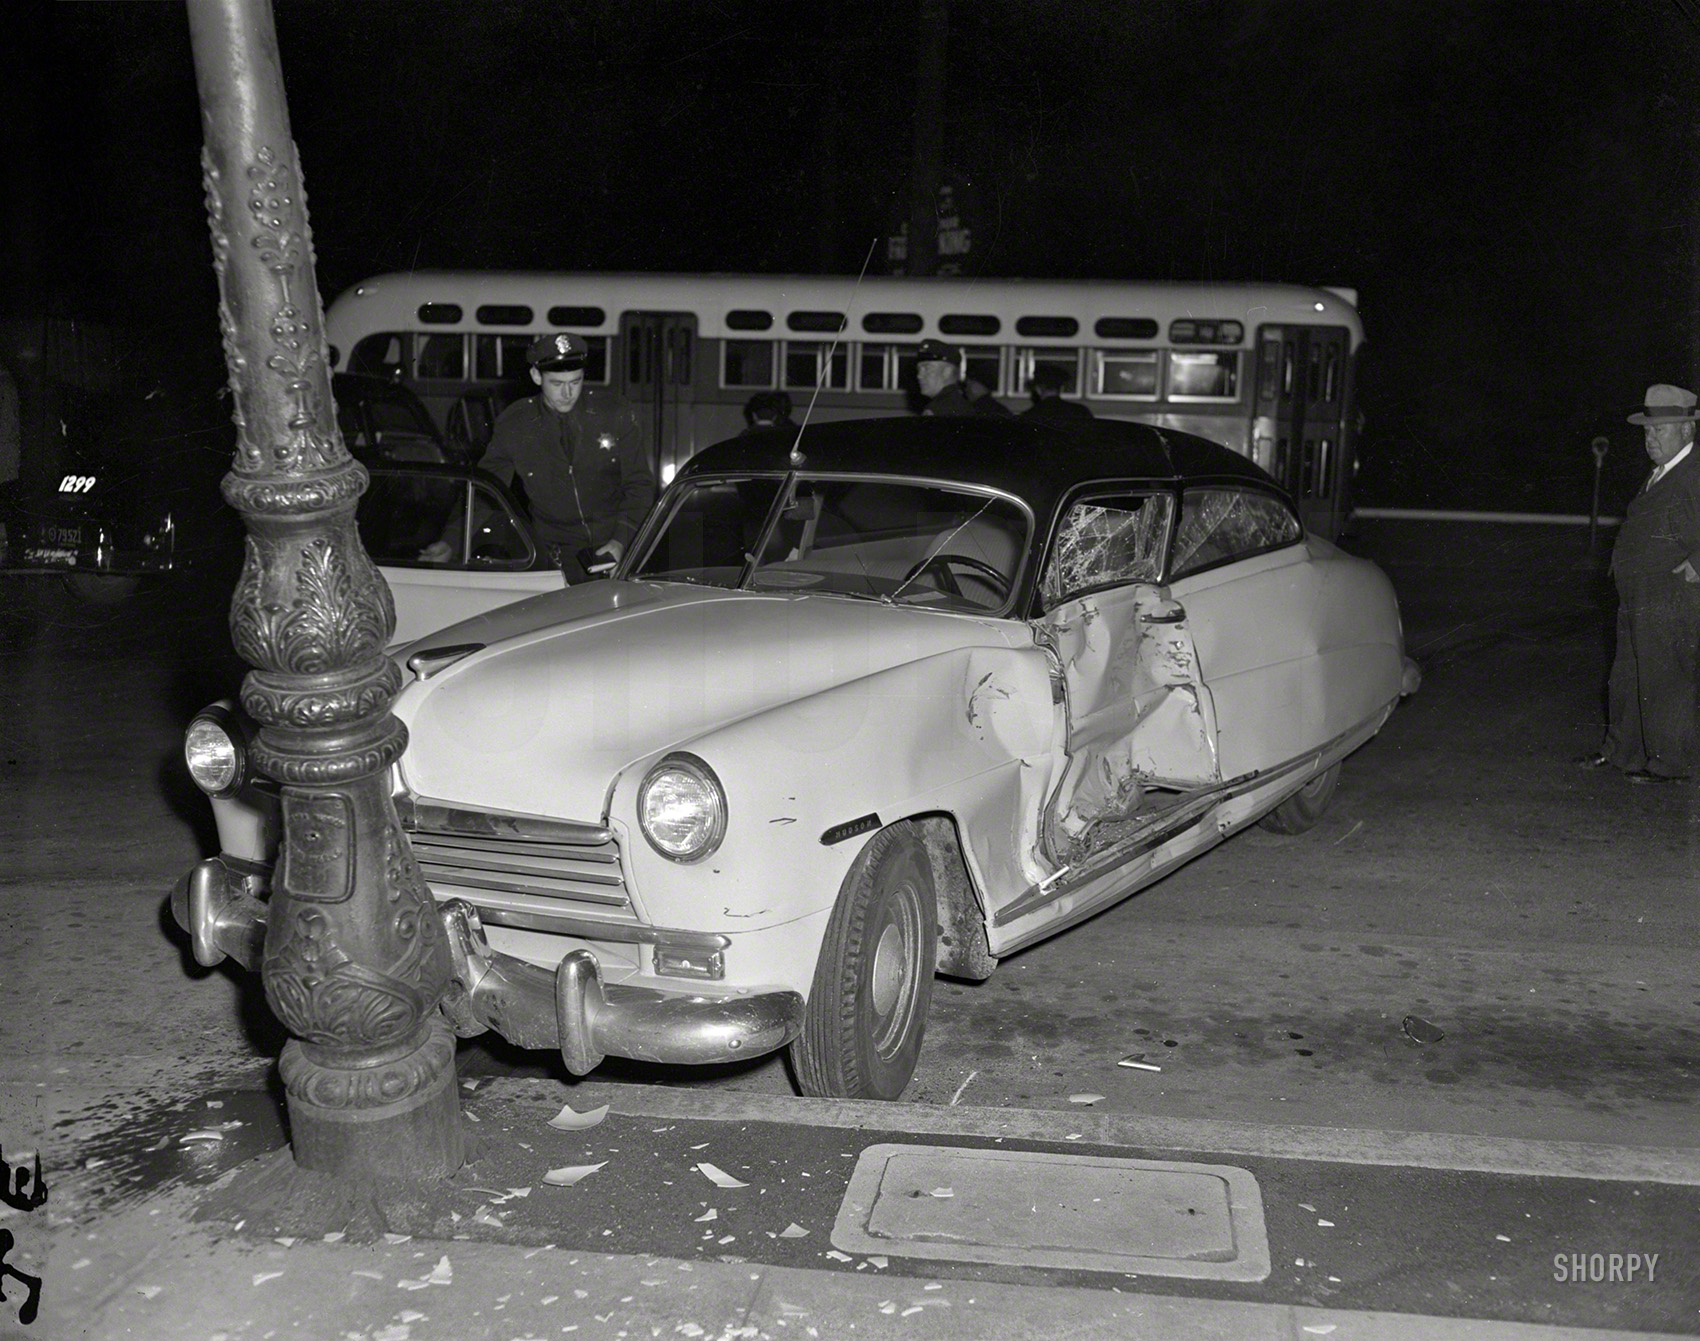 We're back in 1950s Oakland as we return to the scene of yet another accident: Hudson meets lamppost after being hit broadside. The car's unit body seems to have held up fairly well. 4x5 negative from the News Archive. View full size.